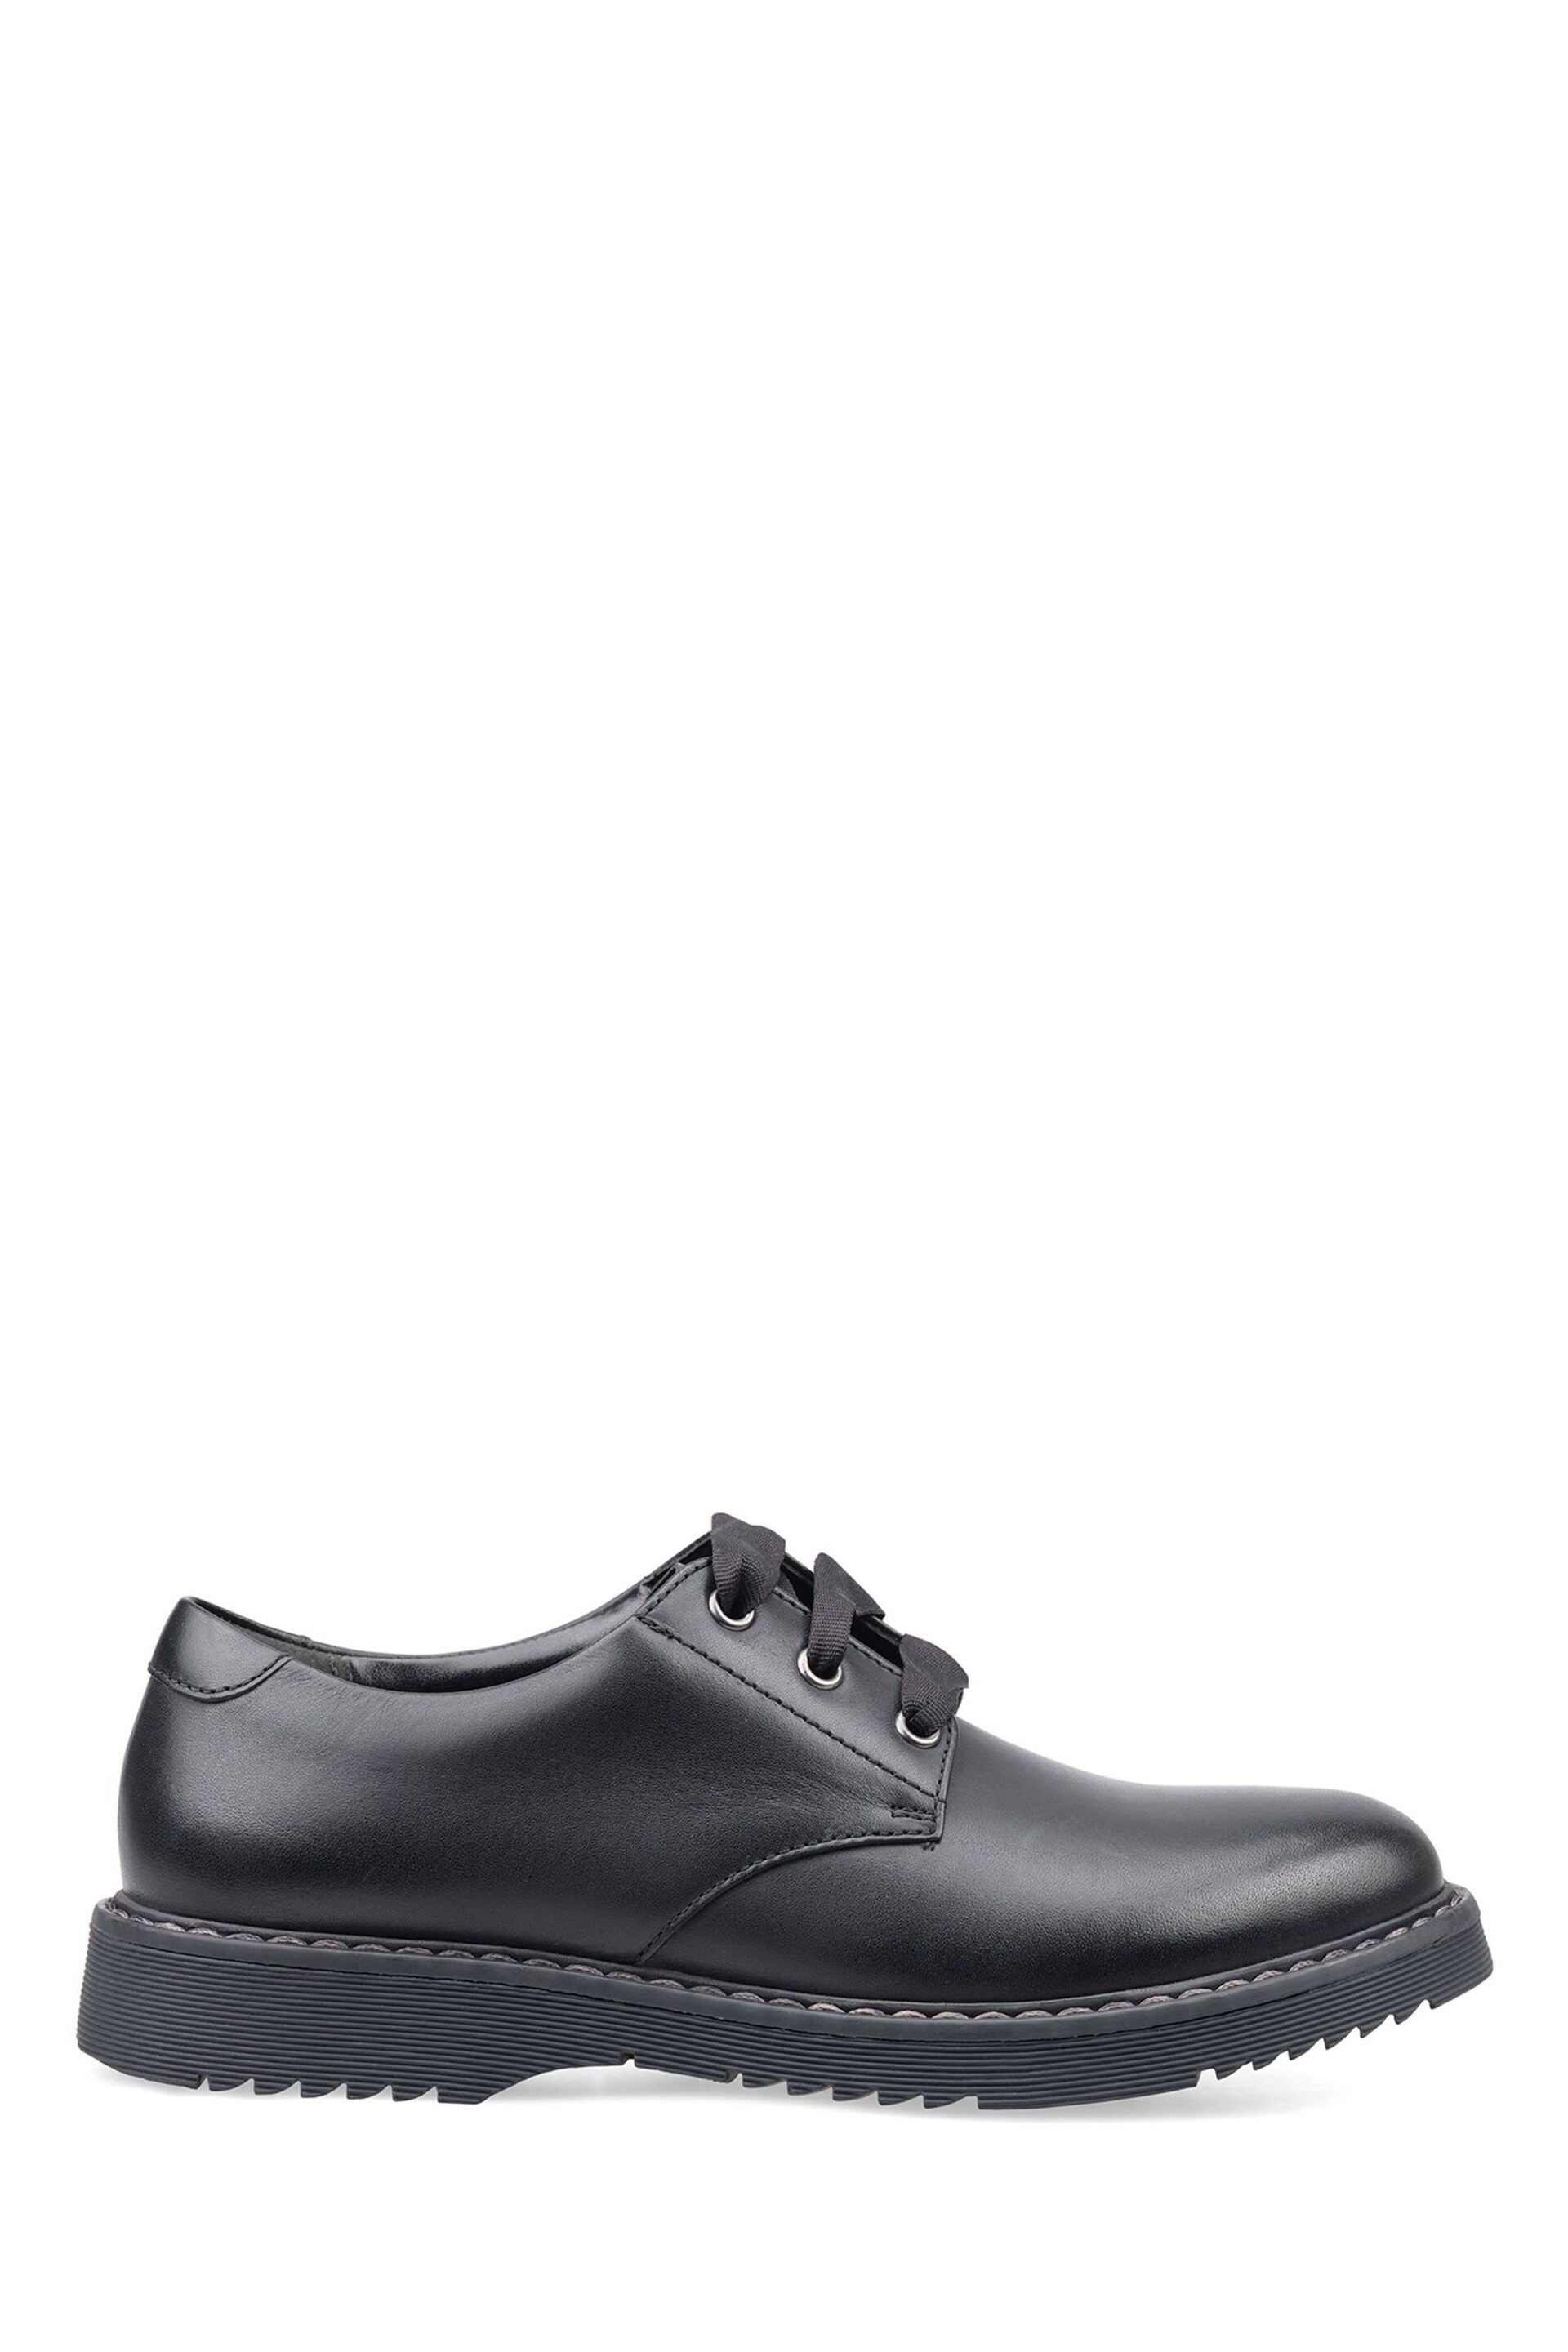 Start-Rite Impact Lace Up Black Leather School Shoes F Fit - Image 1 of 5